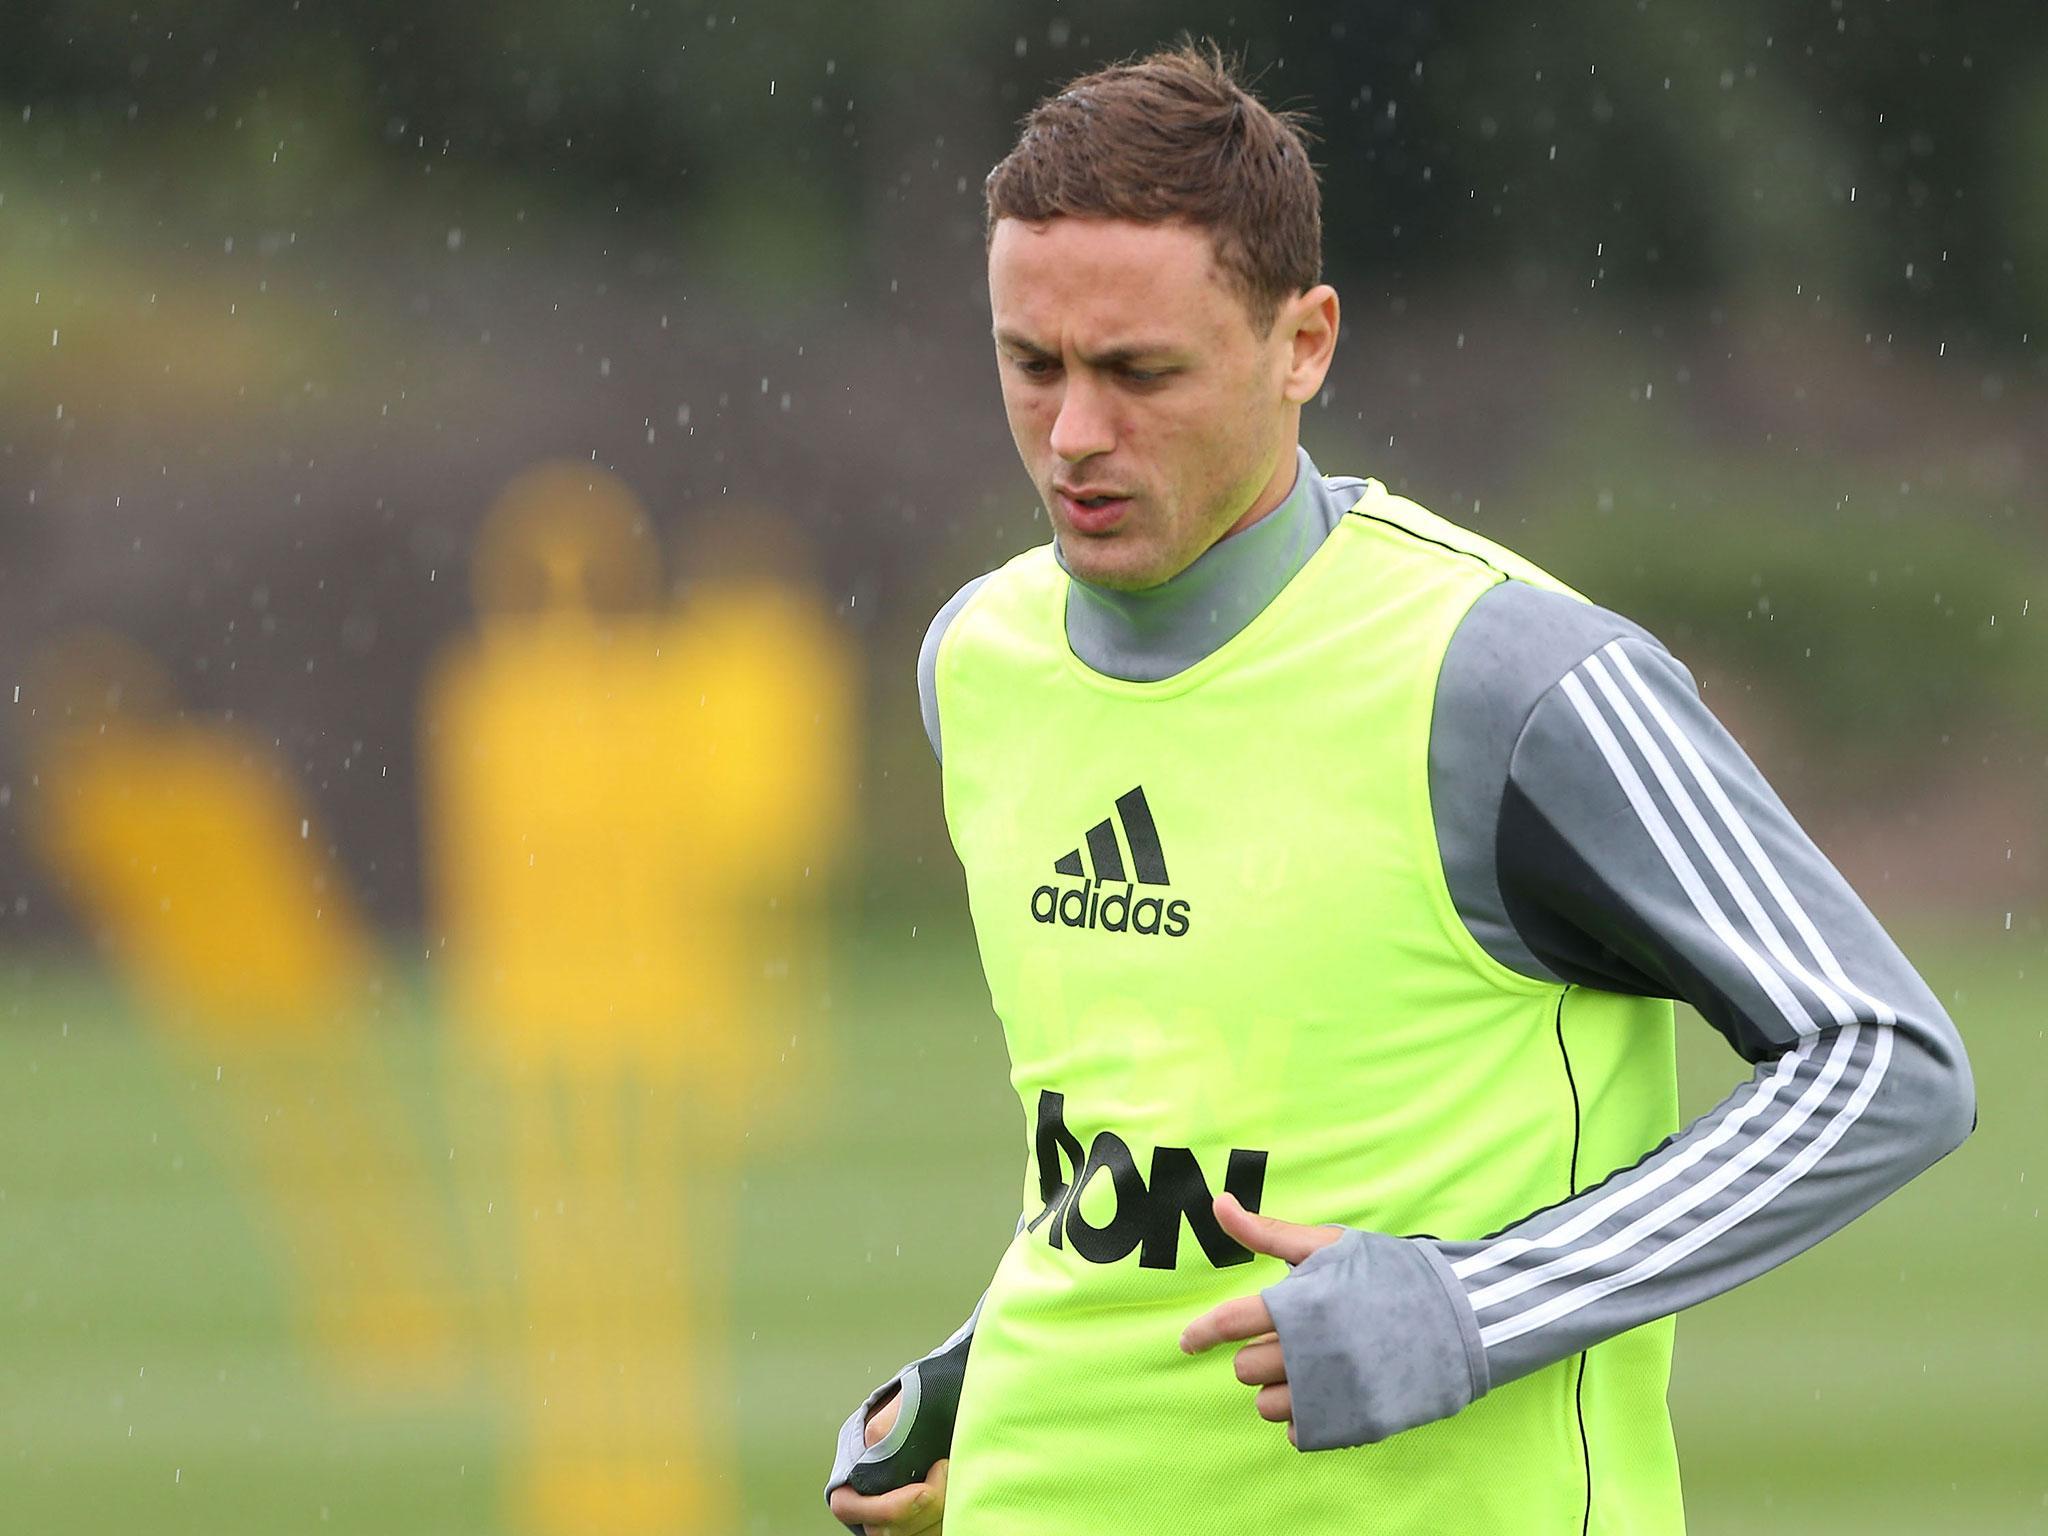 Nemanja Matic is in line to make his debut on Wednesday evening